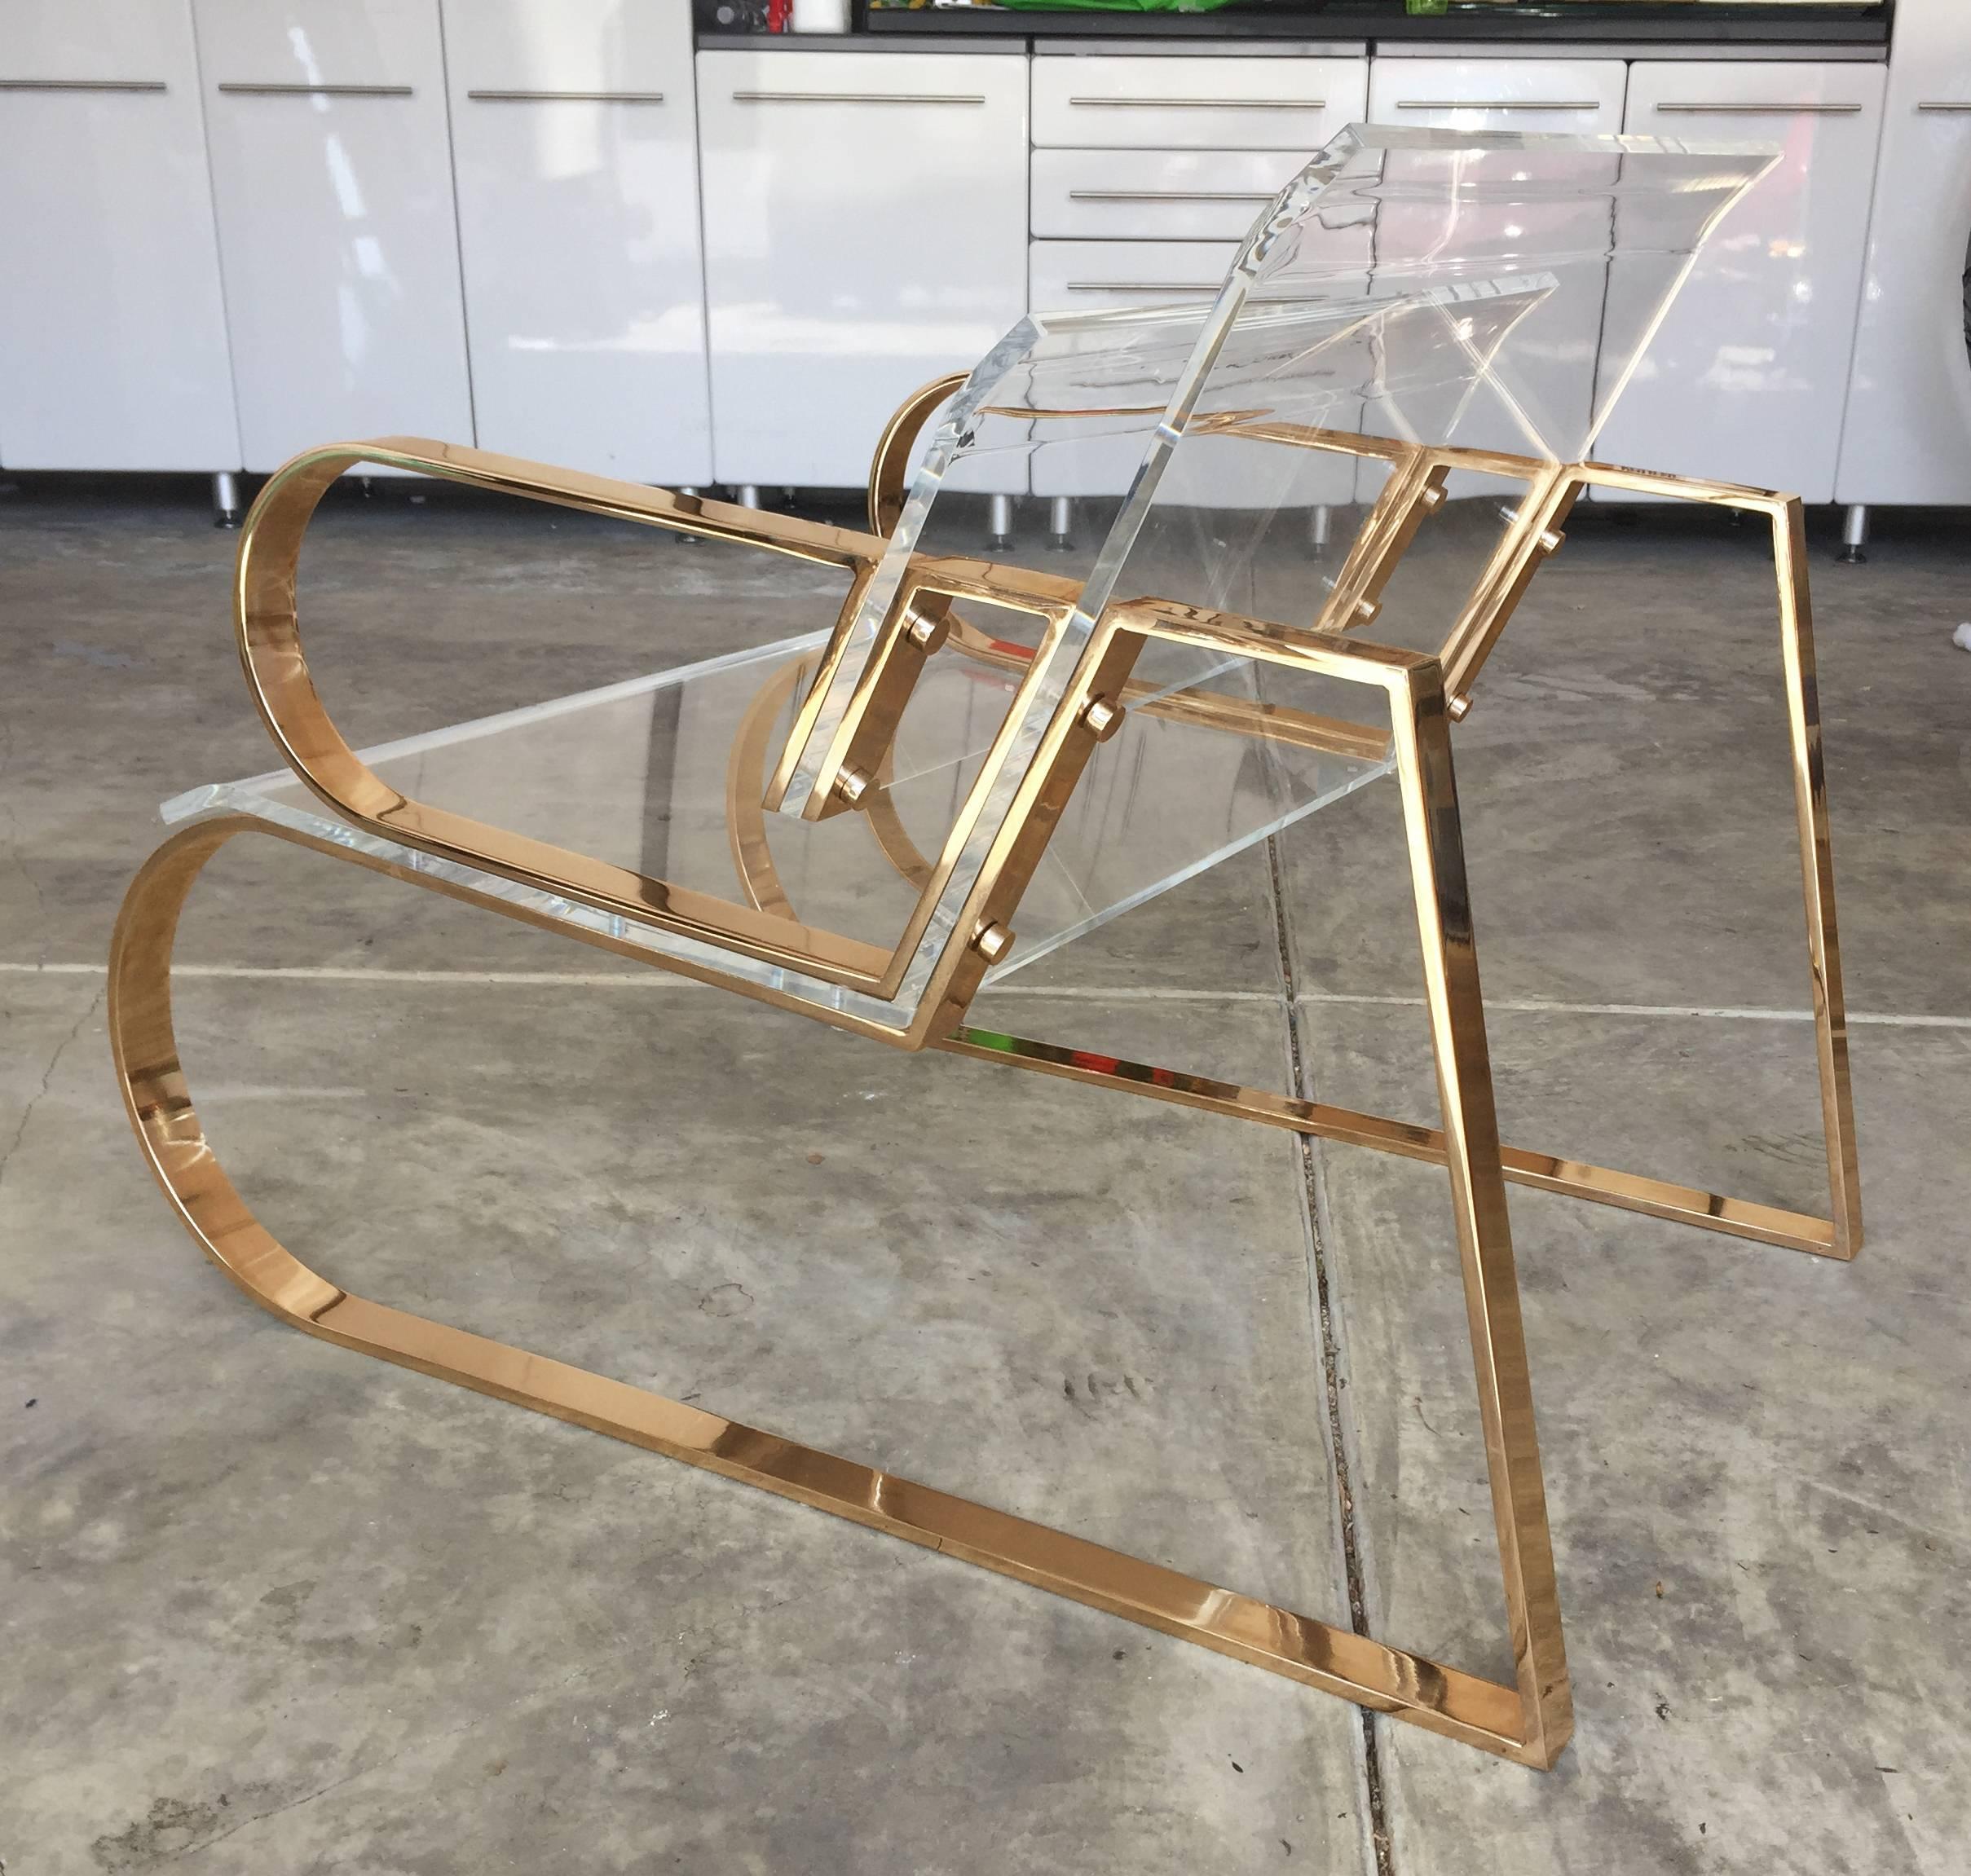 Pair of stunning lounge chairs in Lucite and stainless steel by famed designer, Charles Hollis Jones.
The chairs are from the Double Waterfall collection manufactured in 2016.
The Double Waterfall chair is part the Waterfall Line.
The inspiration